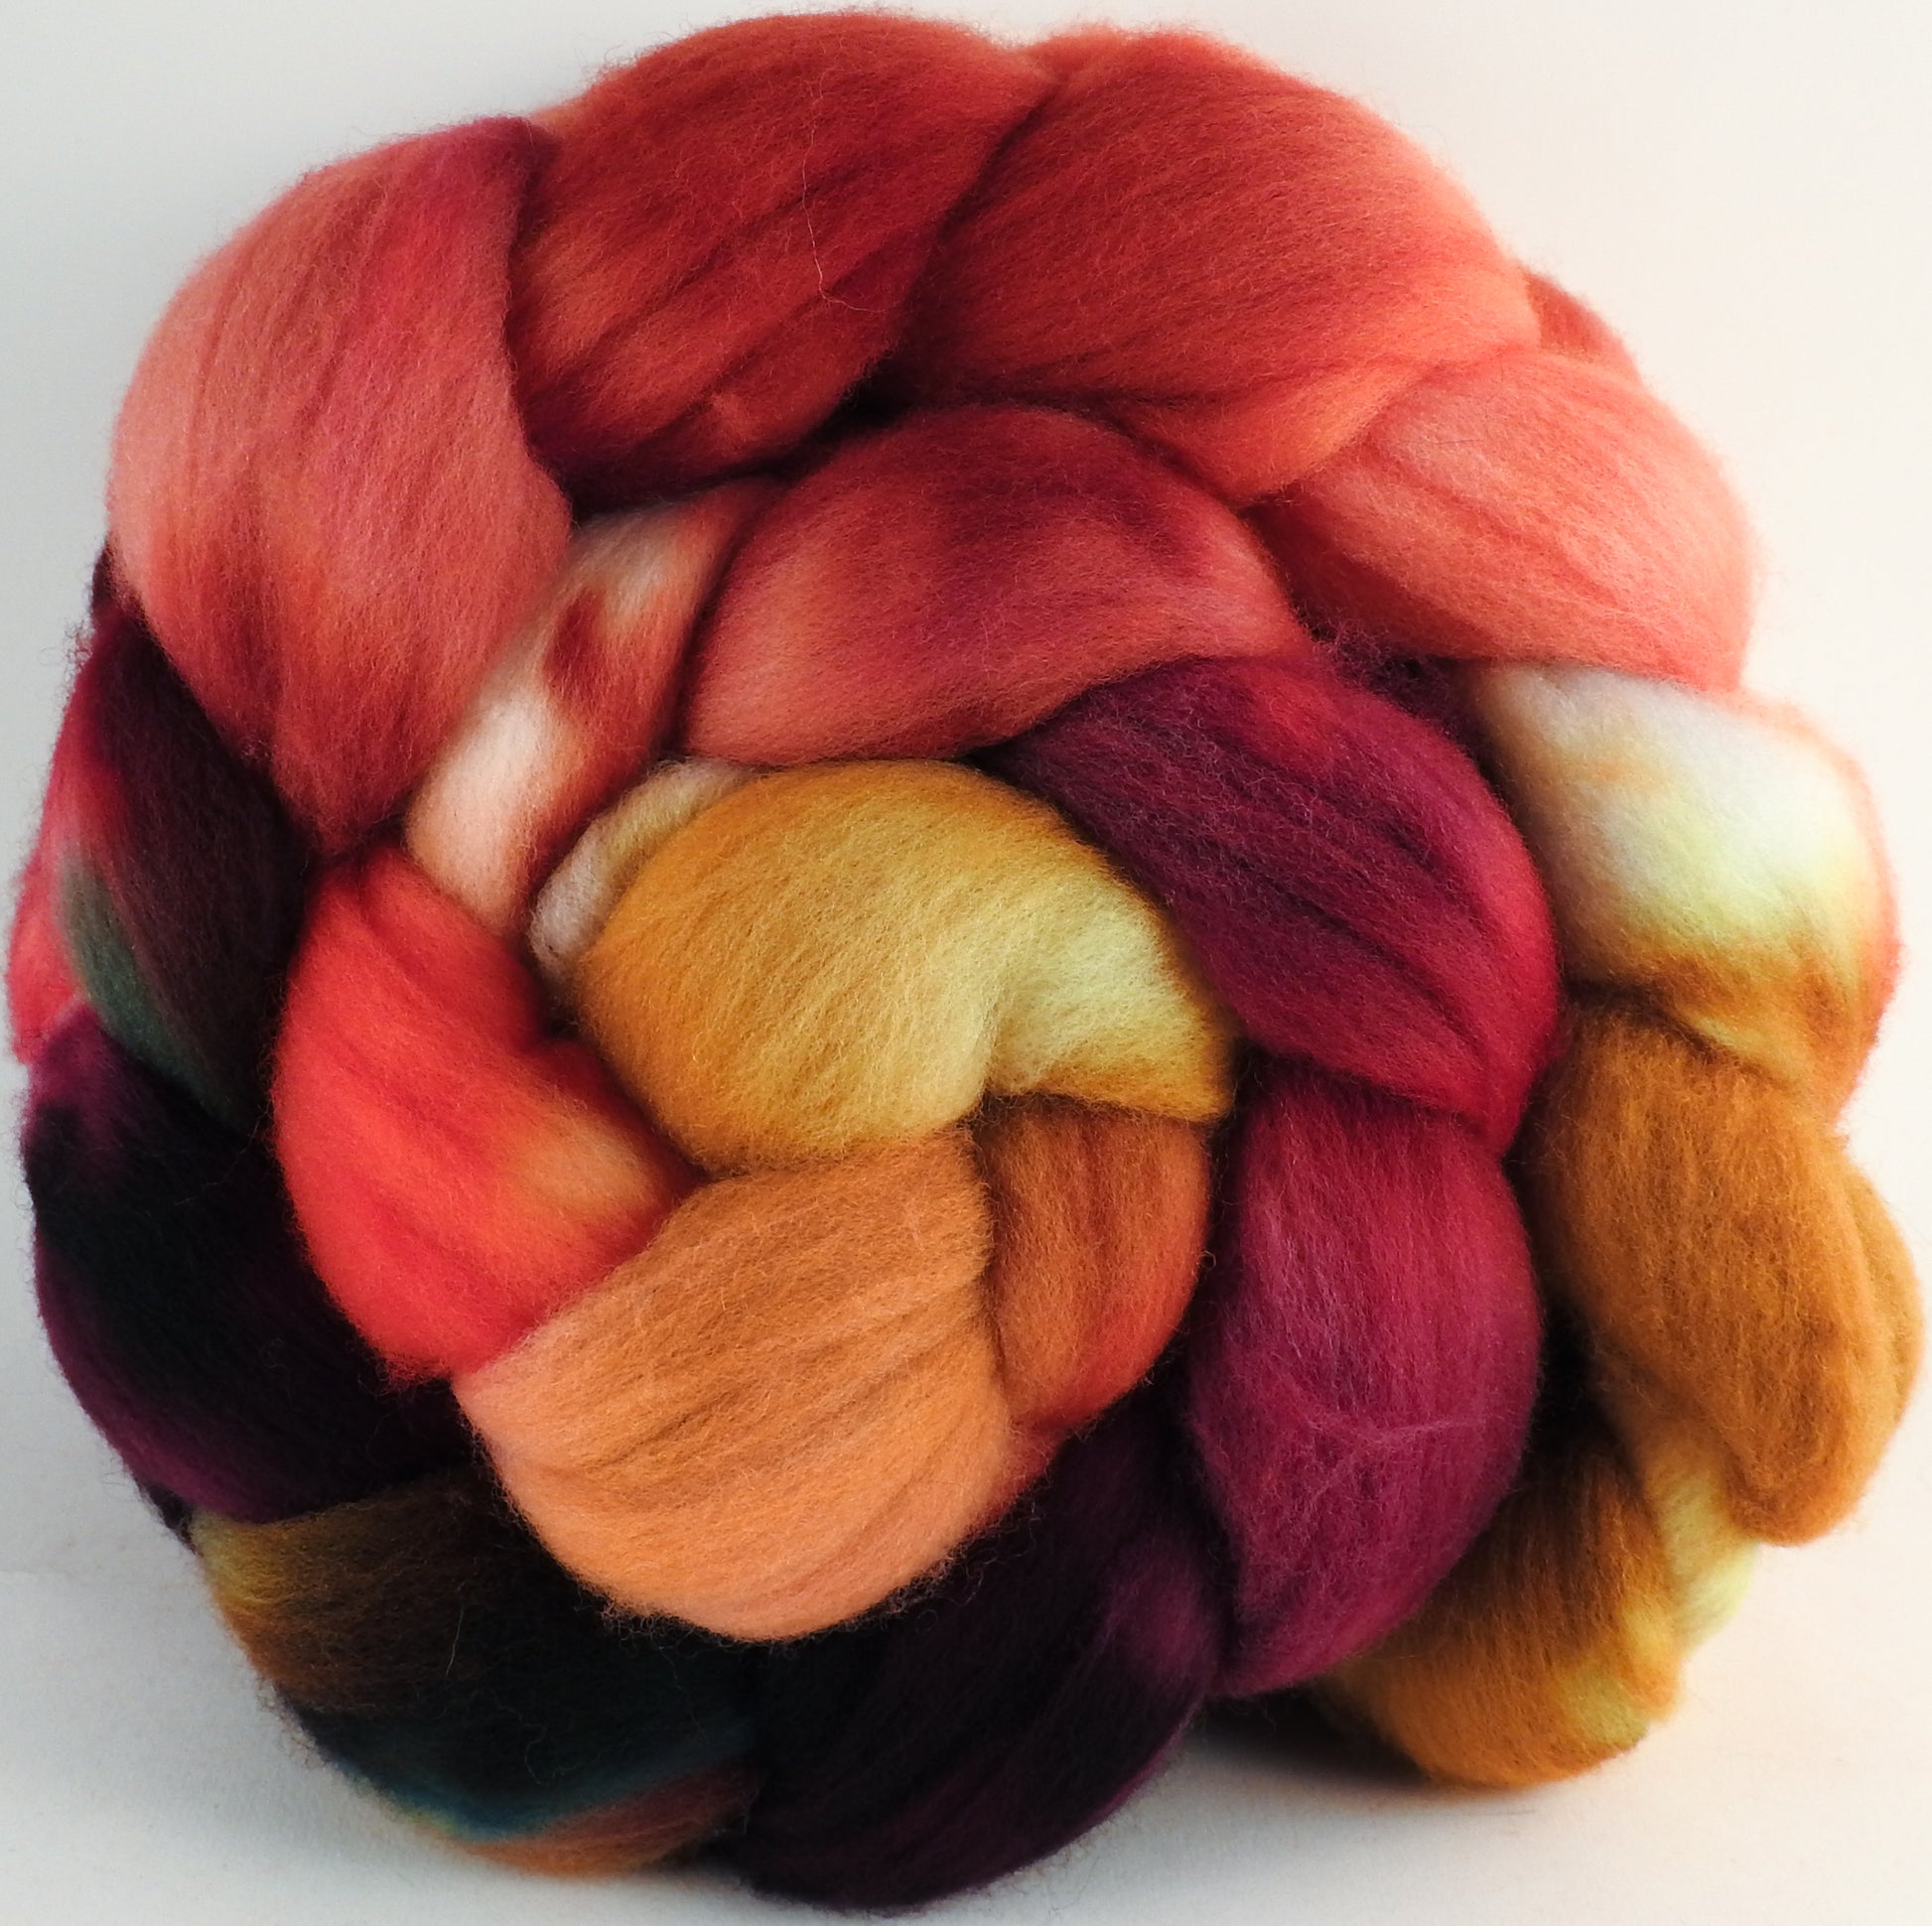 Hand dyed top for spinning - Cherry Medley - (5.3 oz.) Organic Polwarth - Inglenook Fibers